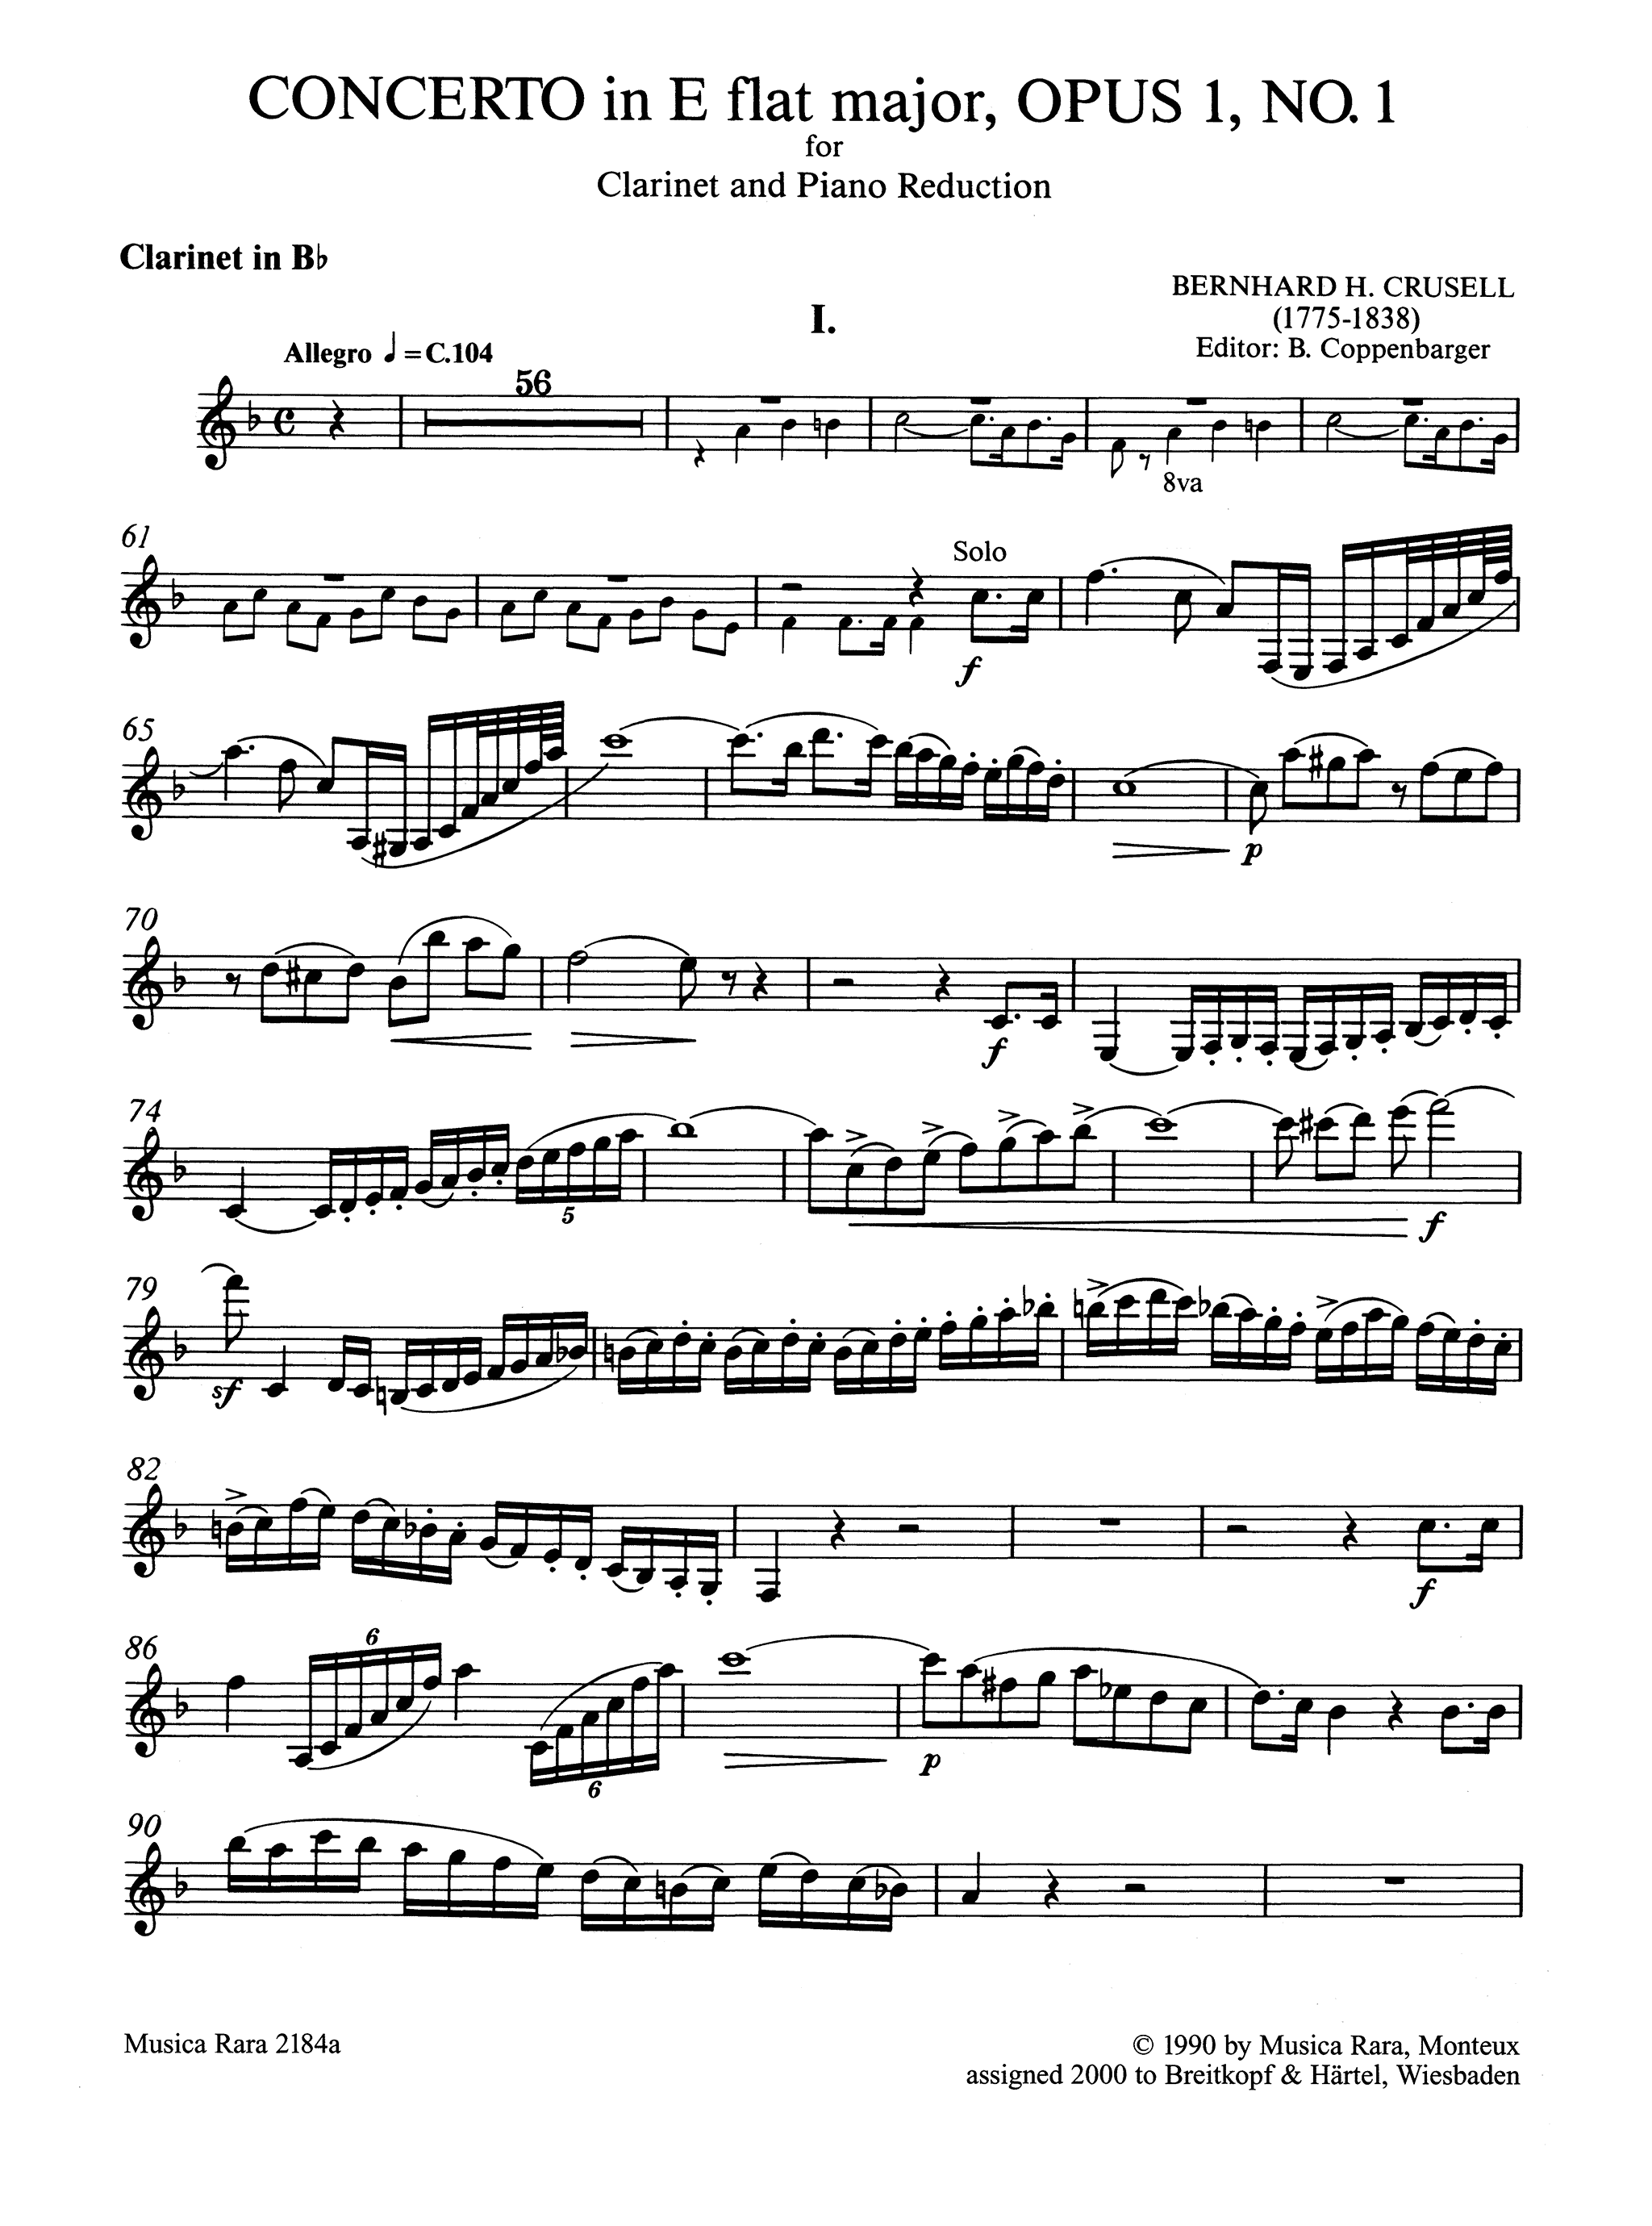 Crusell Clarinet Concerto in E-flat Major, Op. 1 Clarinet part